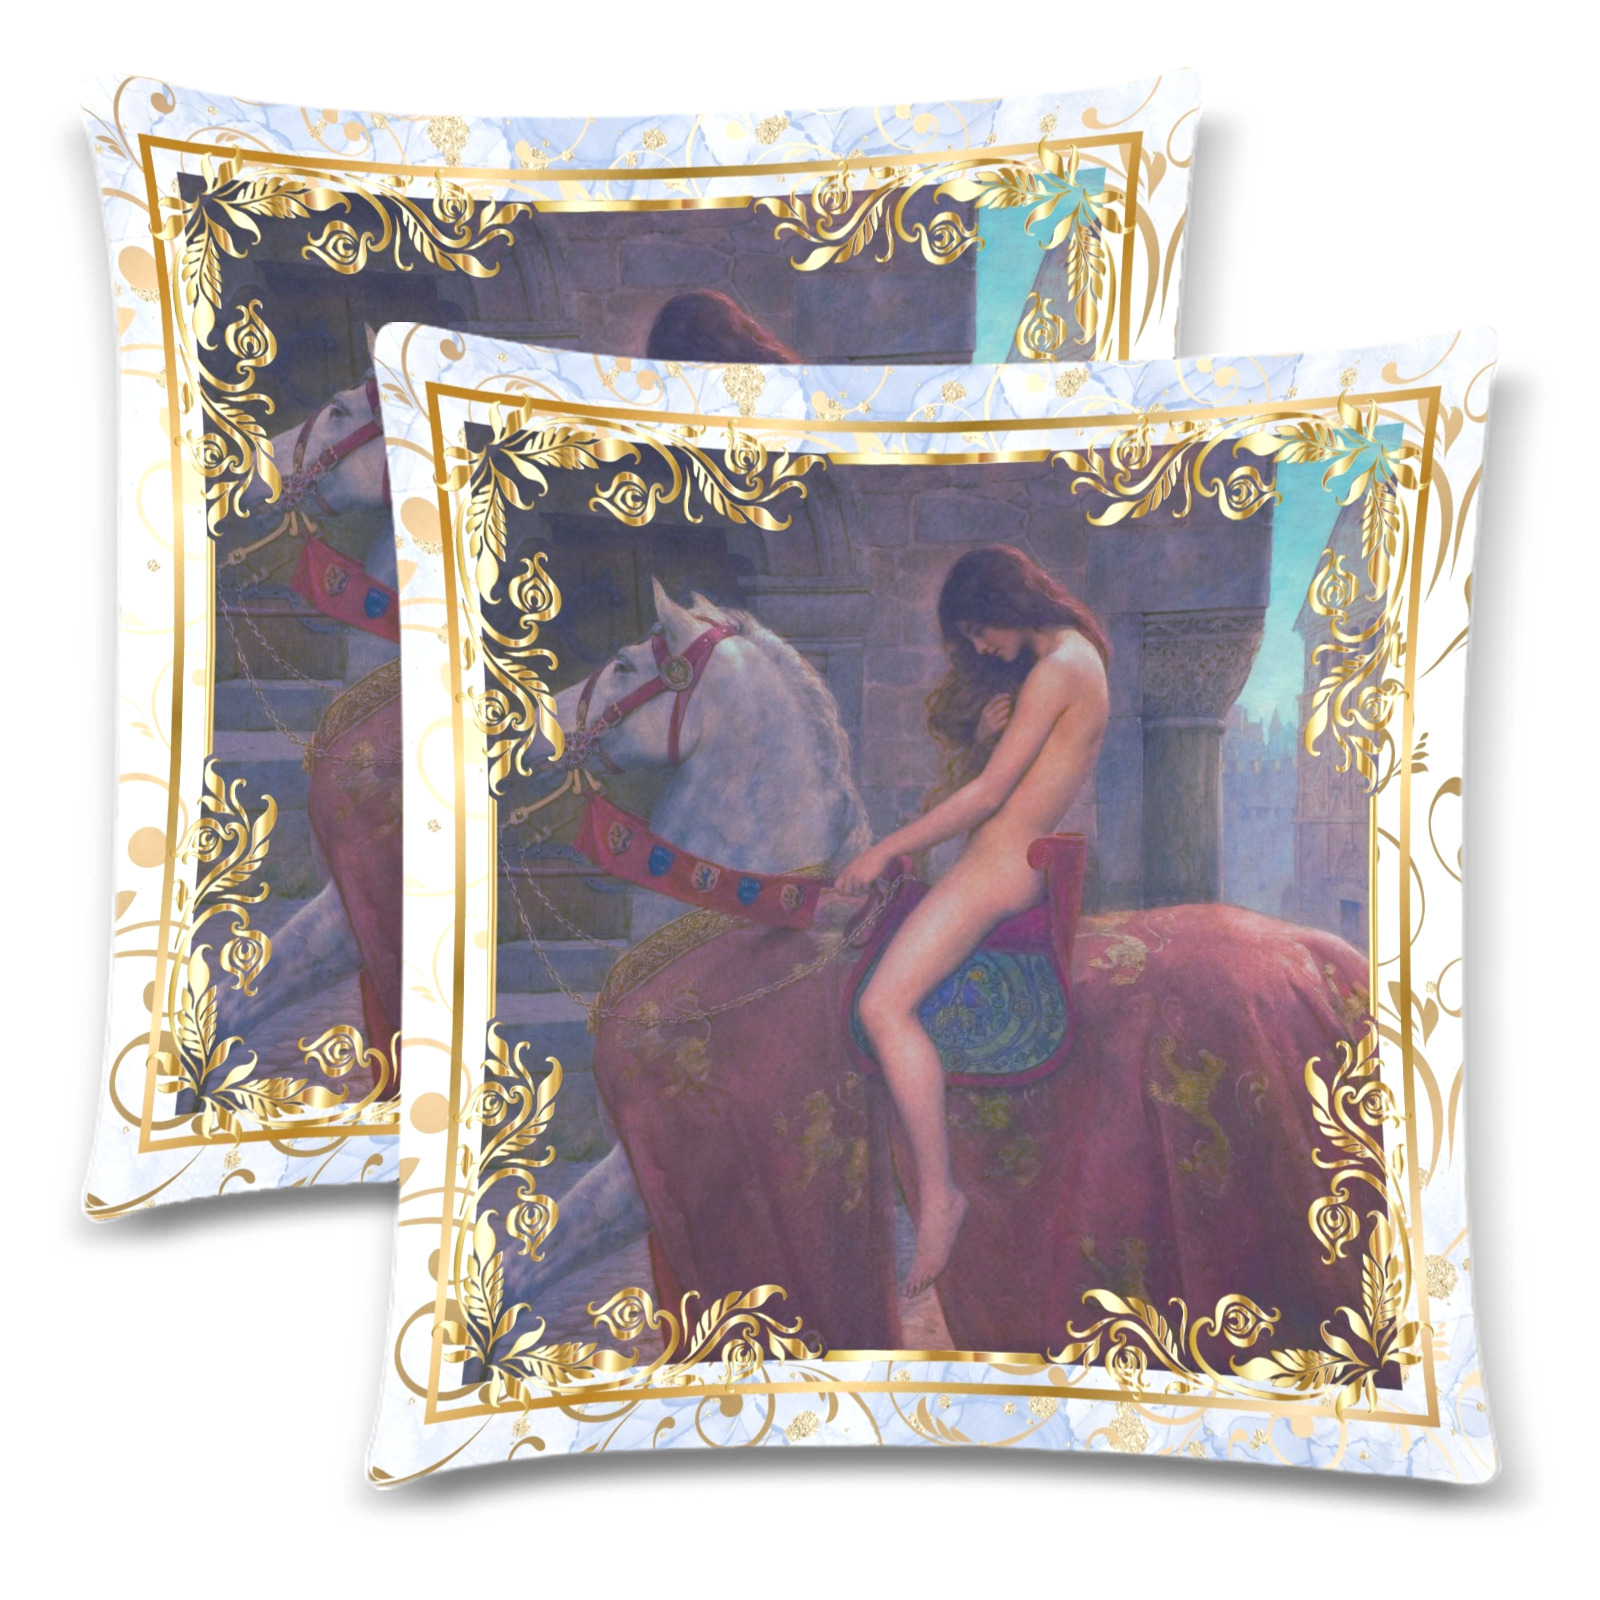 First Remastered Version of Lady Godiva by John Collier Custom Zippered Pillow Cases 18"x 18" (Twin Sides) (Set of 2)